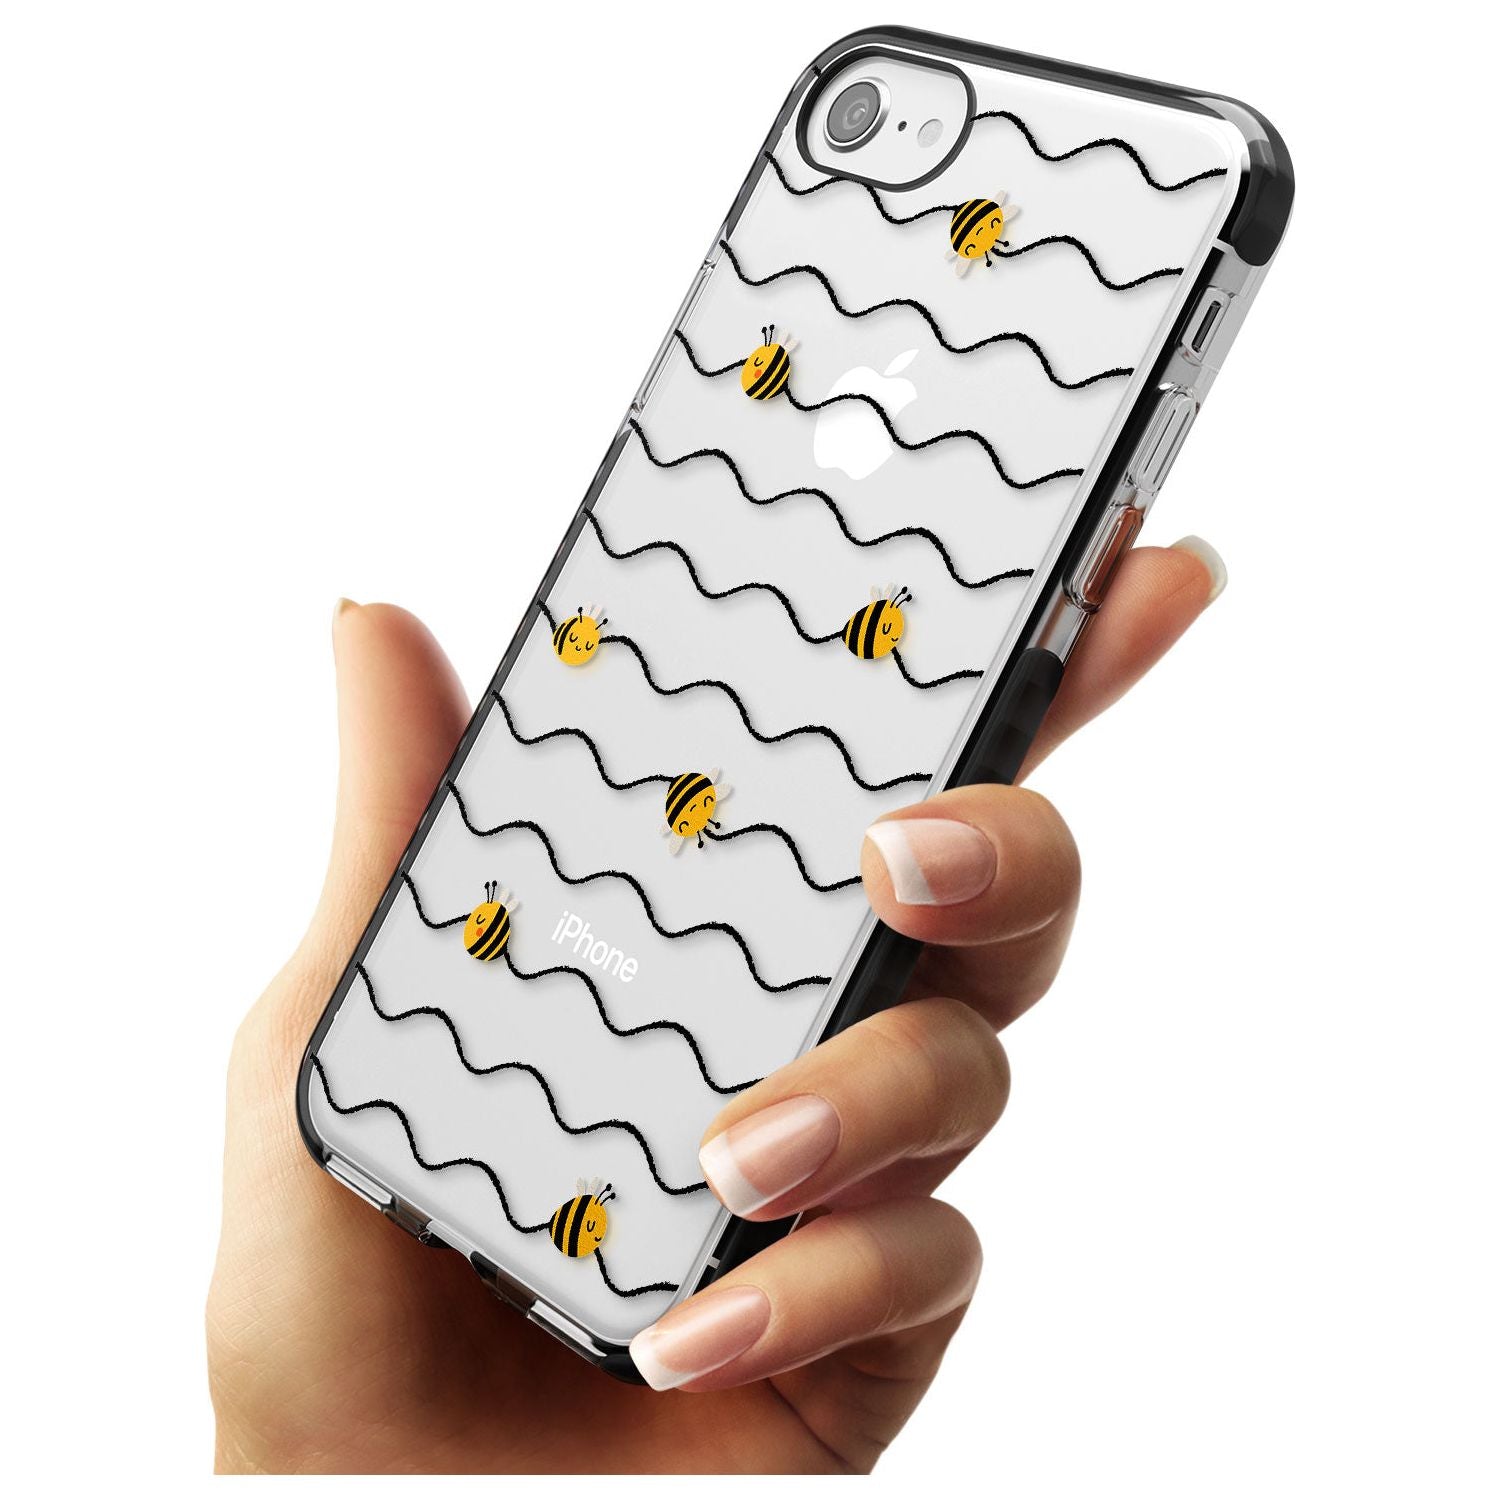 Sweet as Honey Patterns: Bees & Stripes (Clear) Black Impact Phone Case for iPhone SE 8 7 Plus